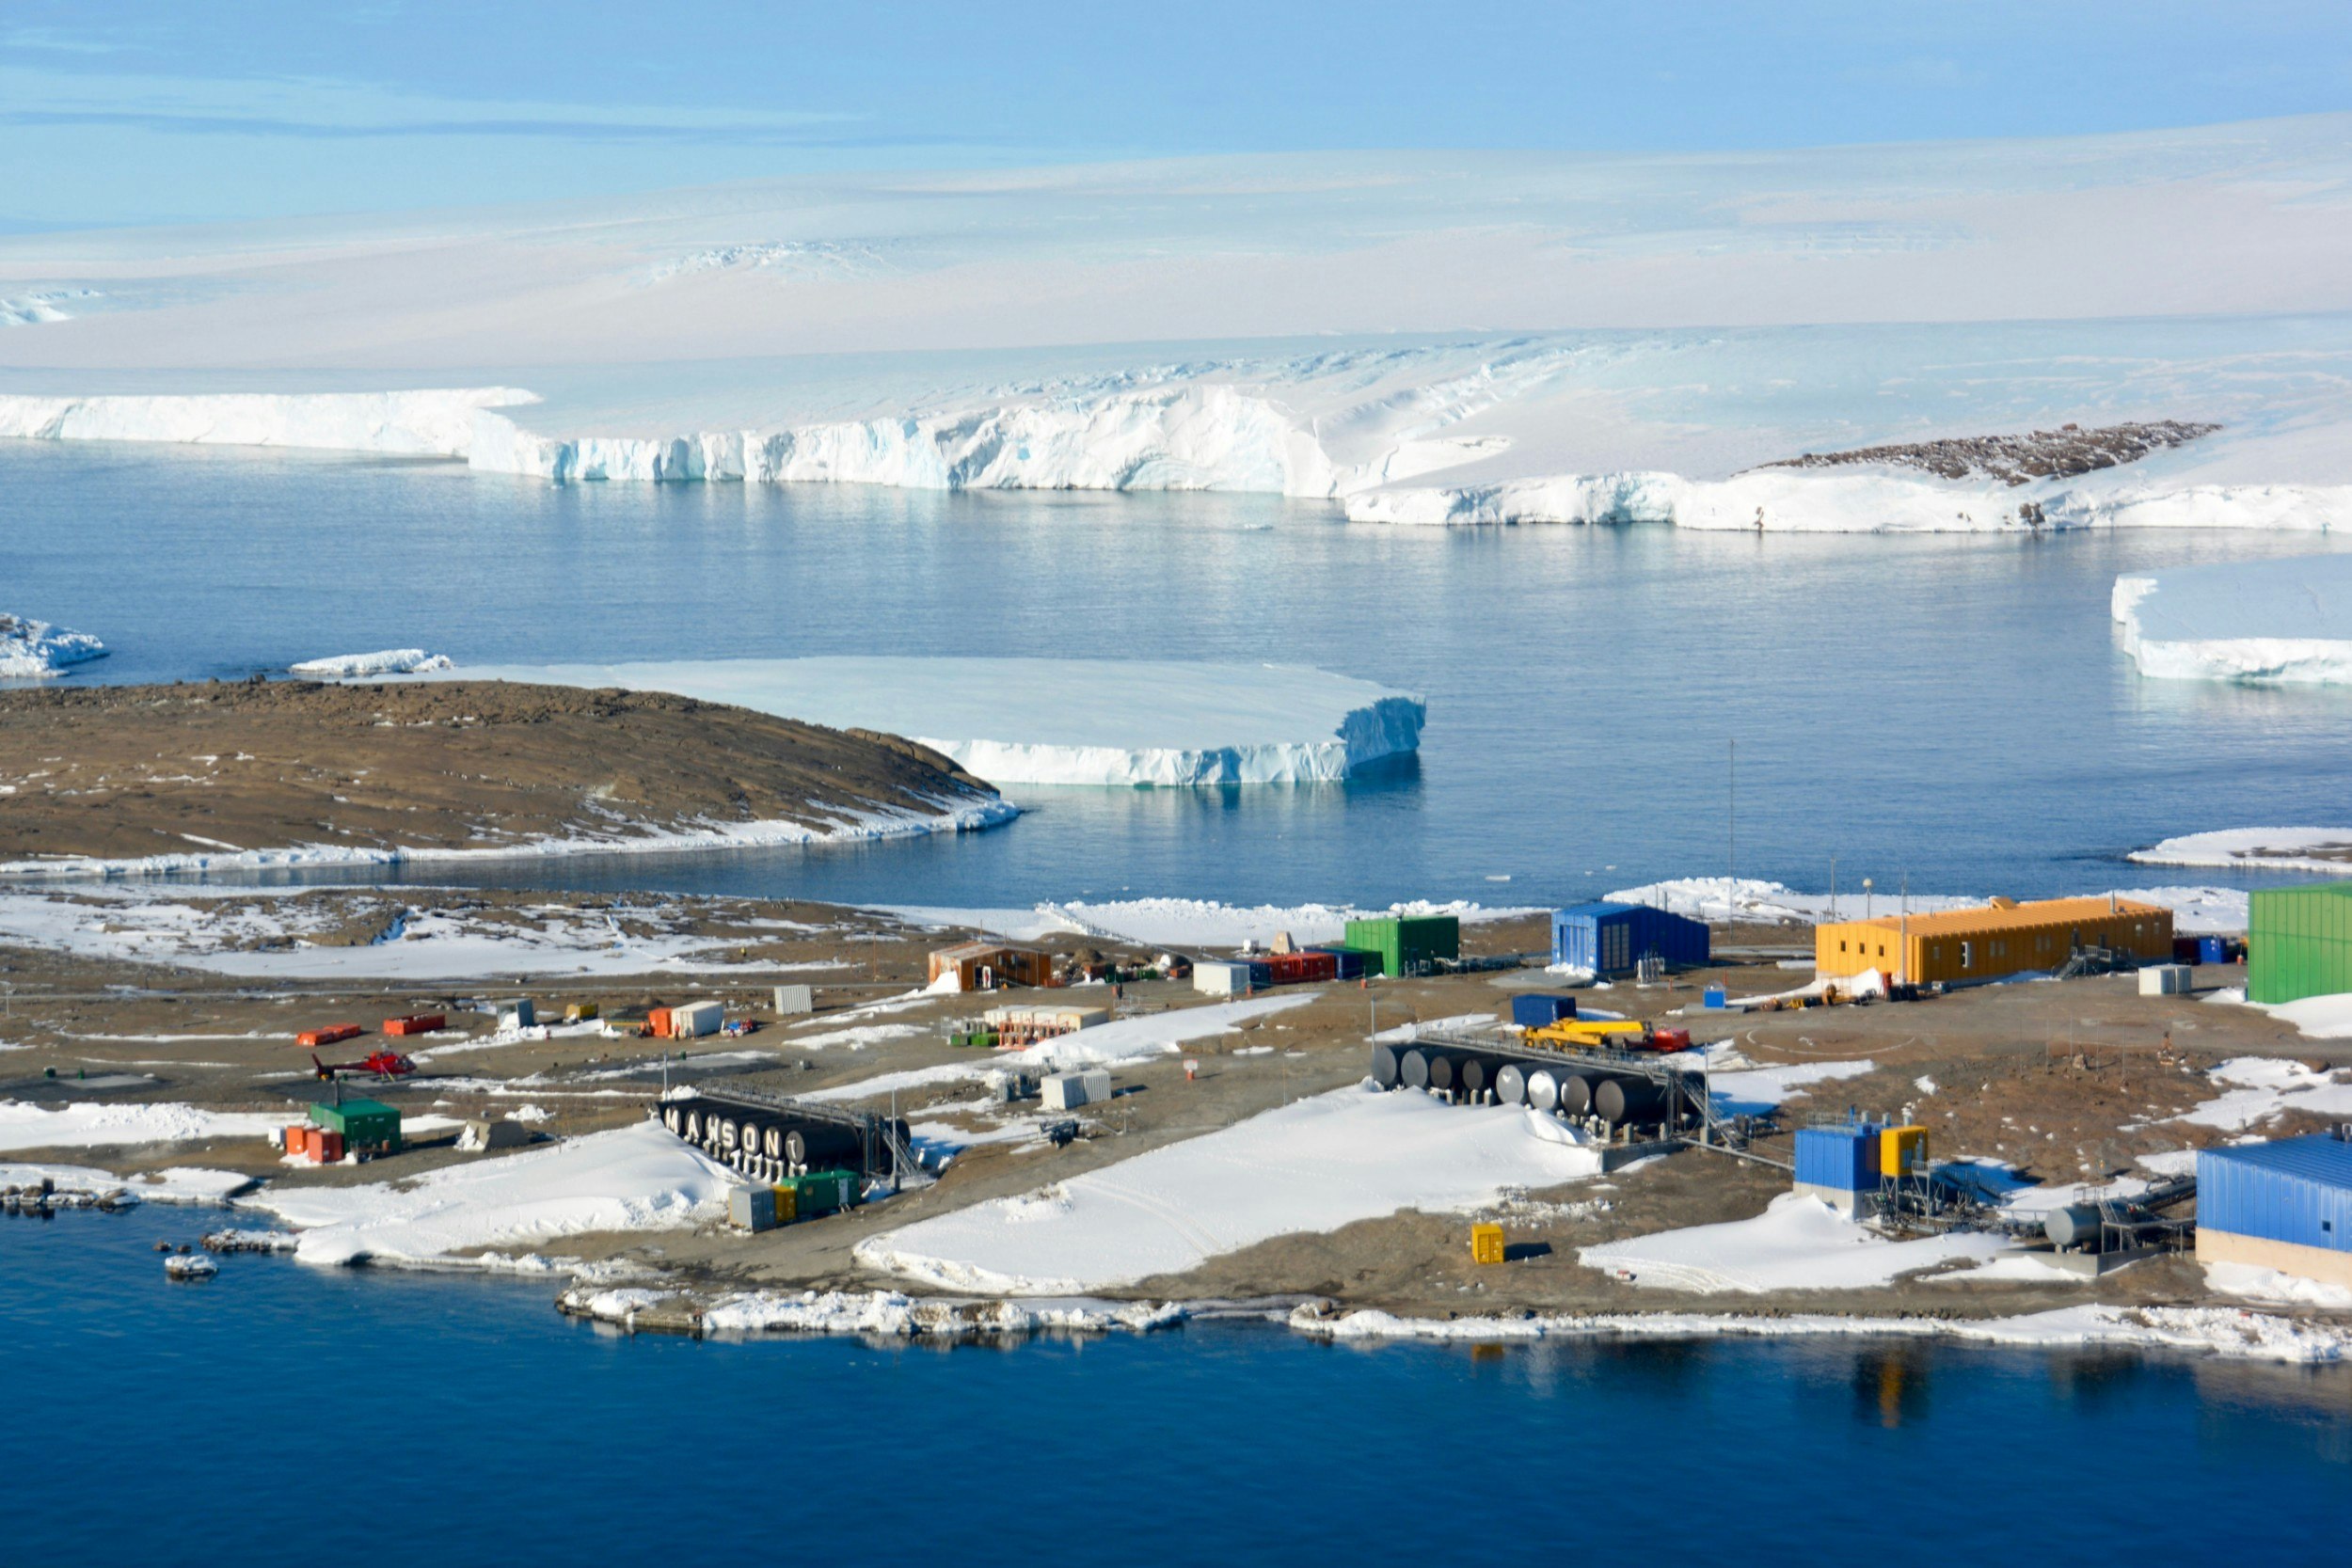 Mawson research station in the Antartic